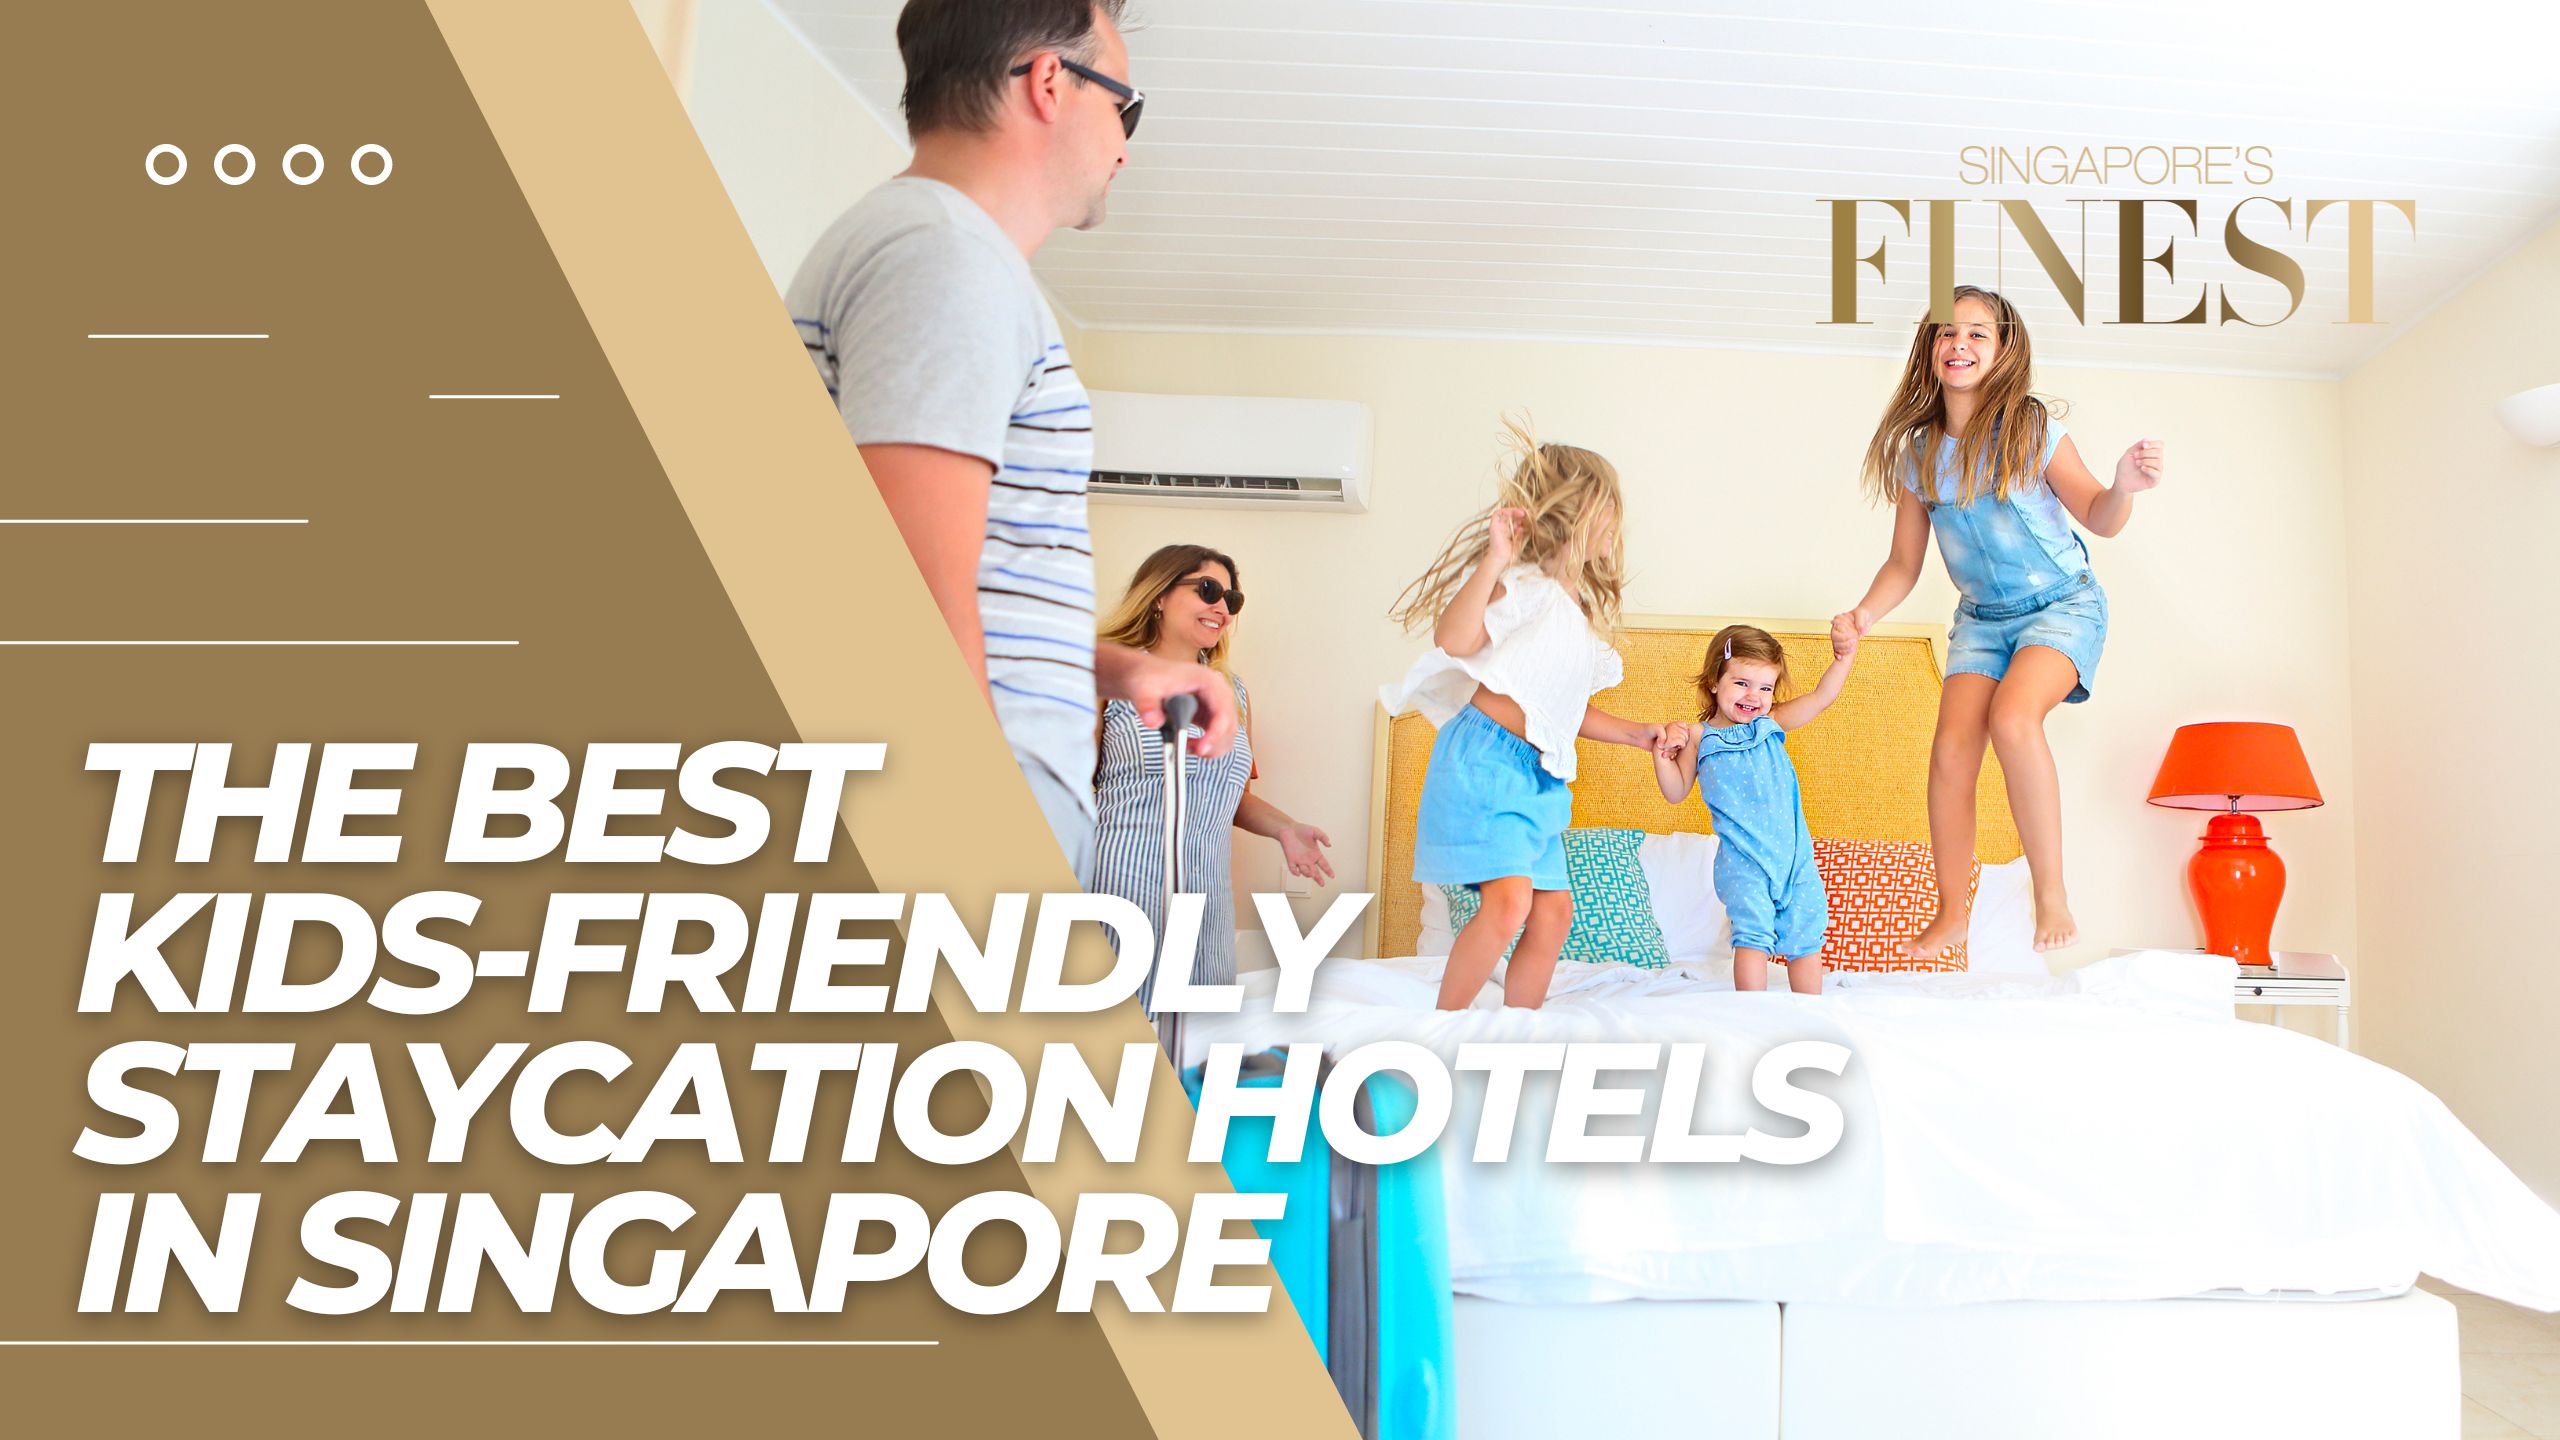 The Finest Kids-Friendly Staycation Hotels in Singapore